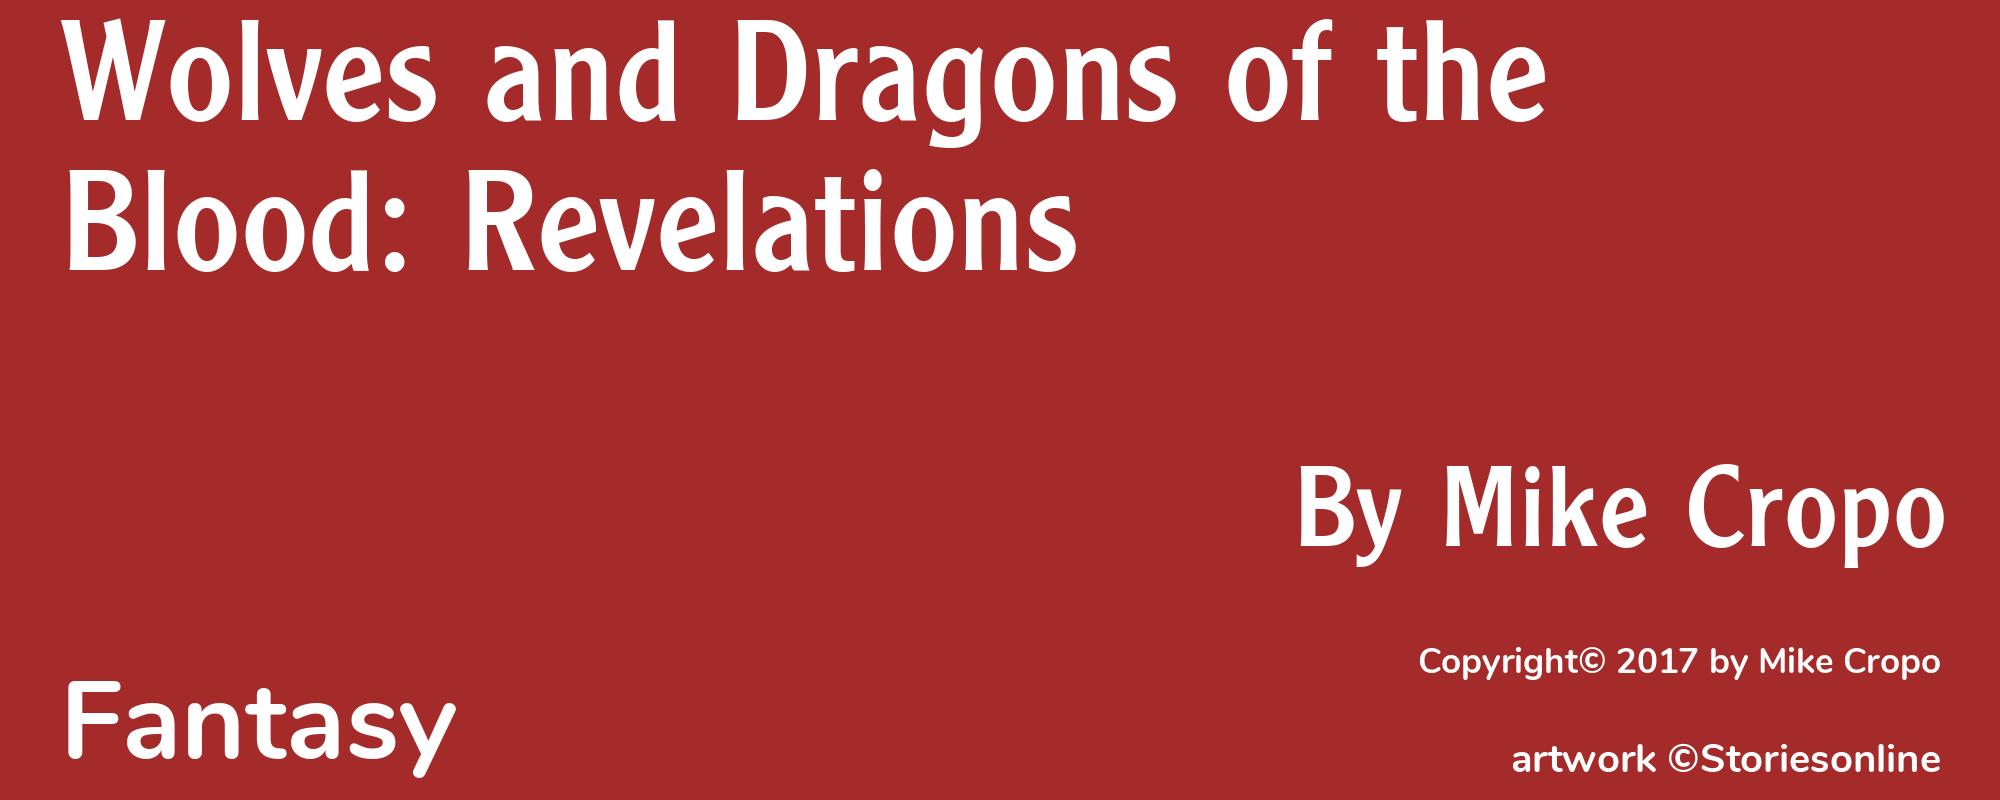 Wolves and Dragons of the Blood: Revelations - Cover